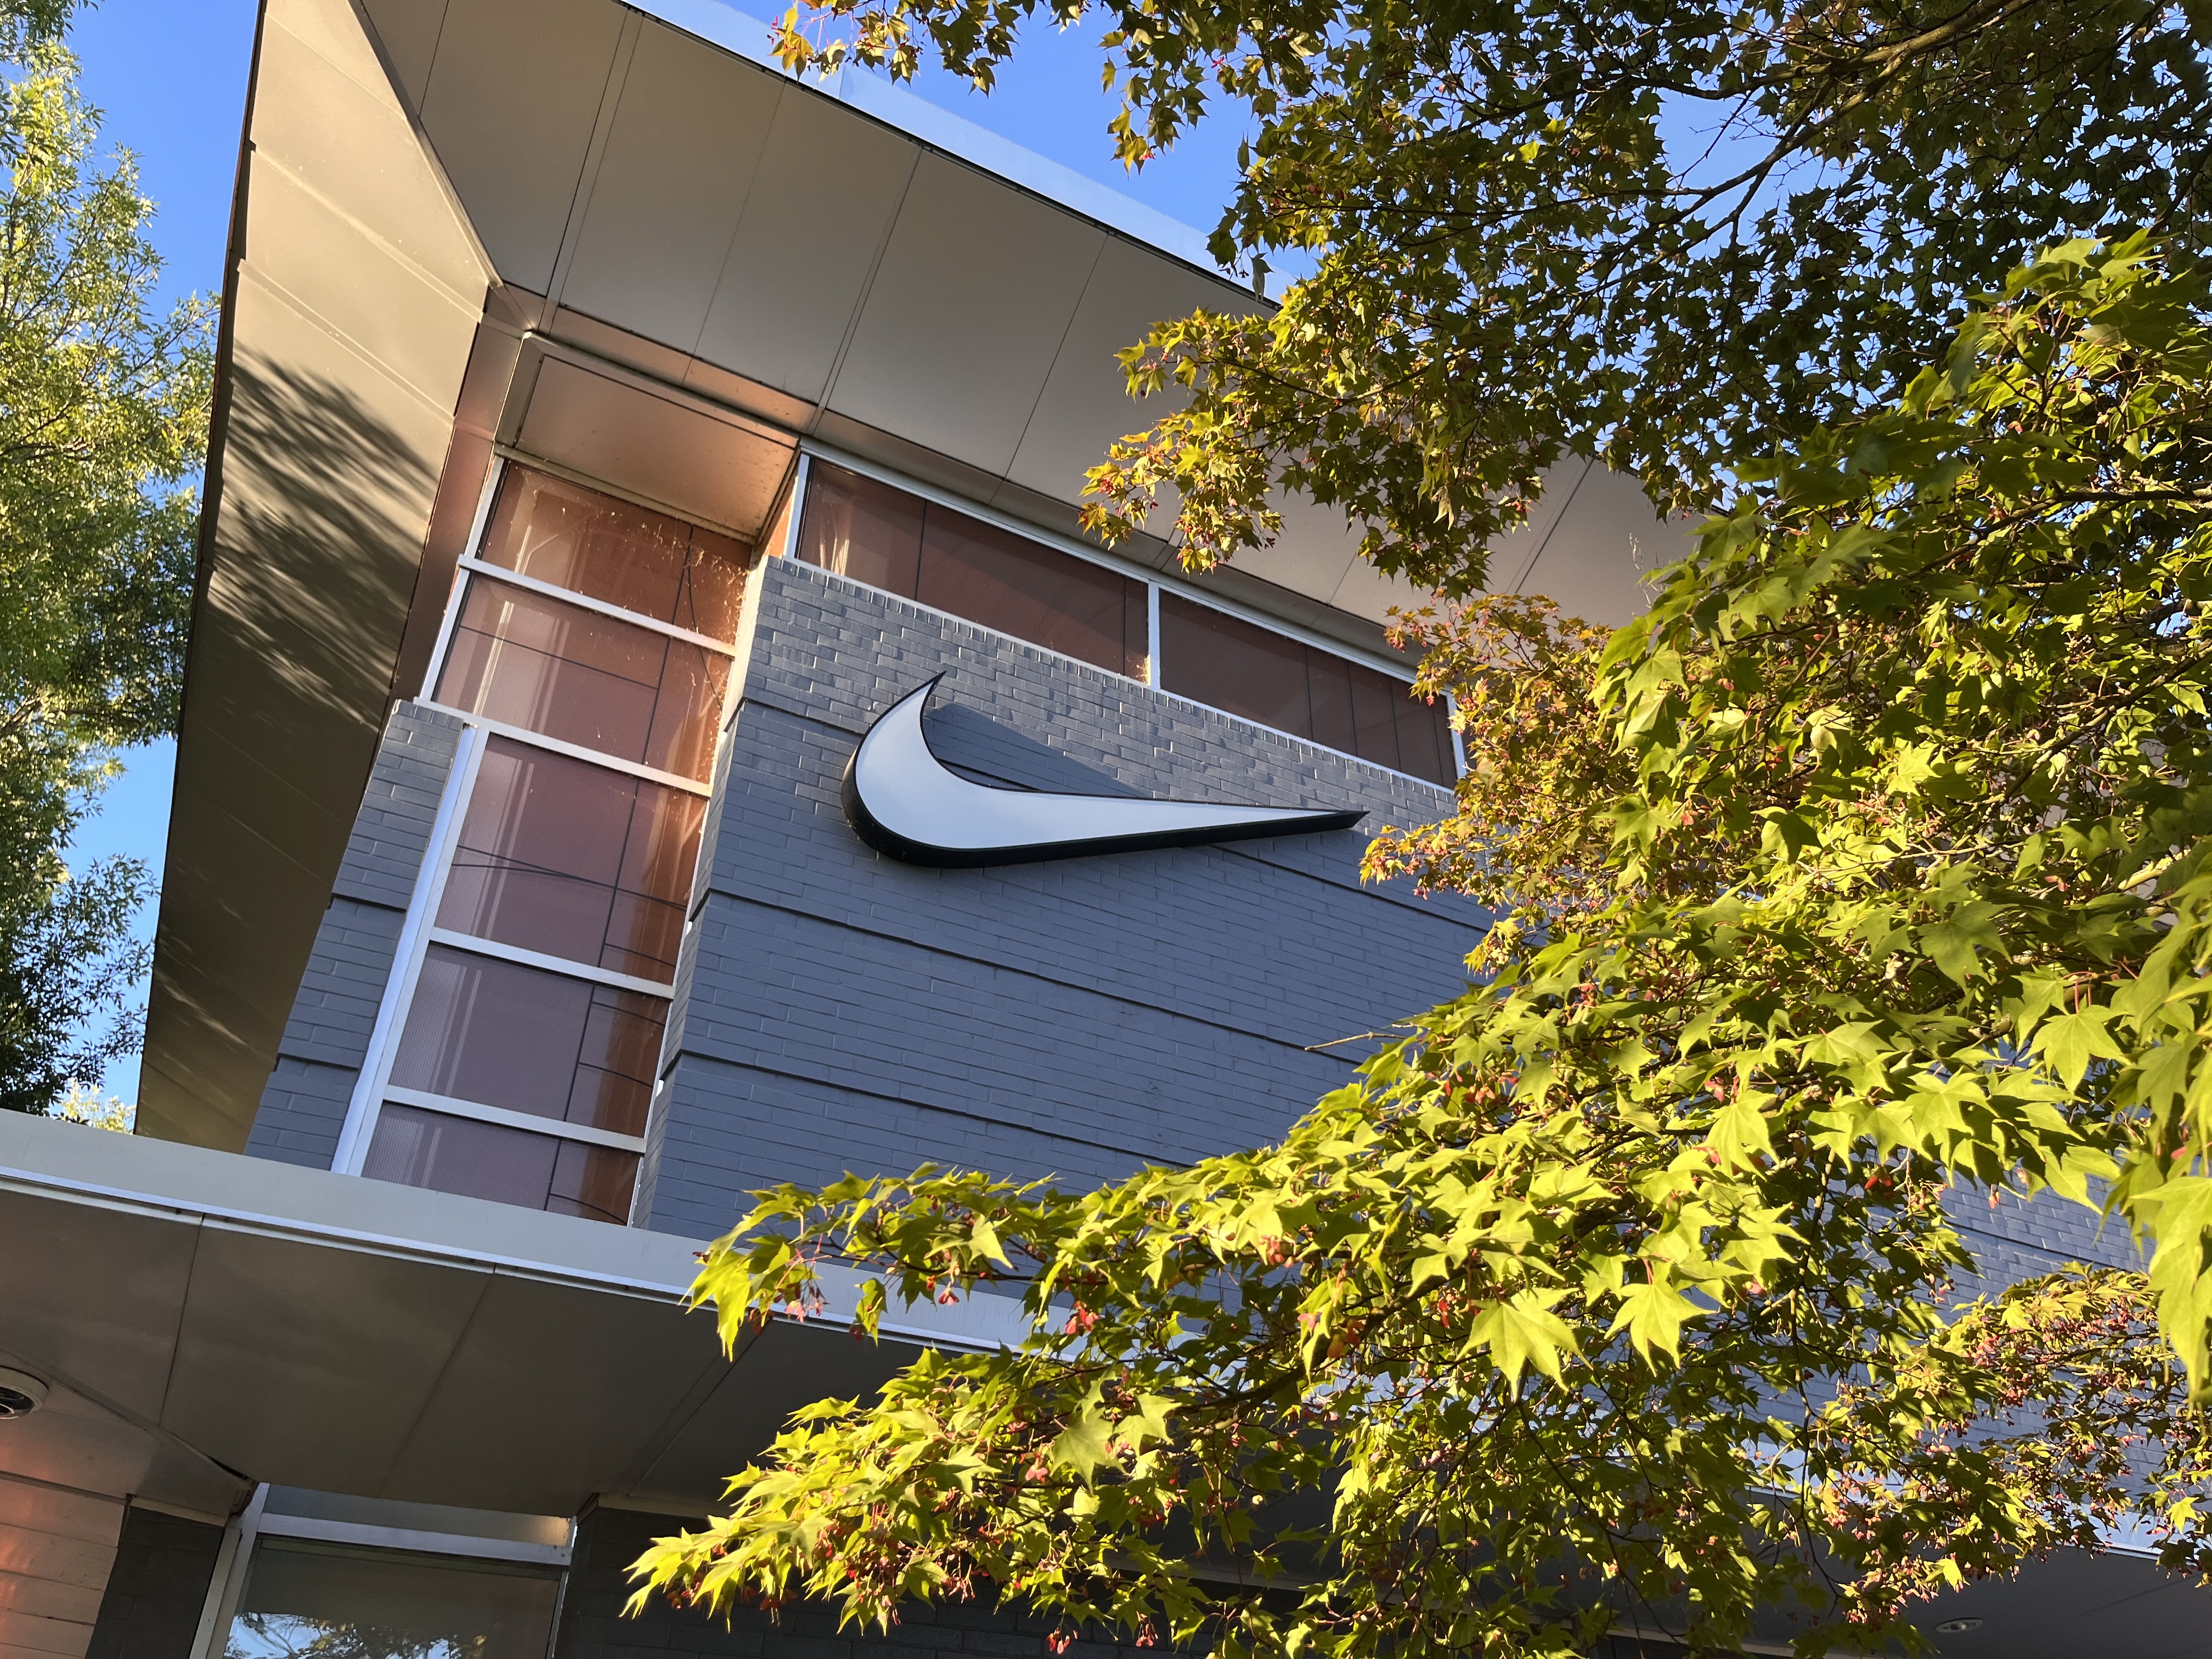 Nike 'pop up' shop - - Build A Container House Ideas